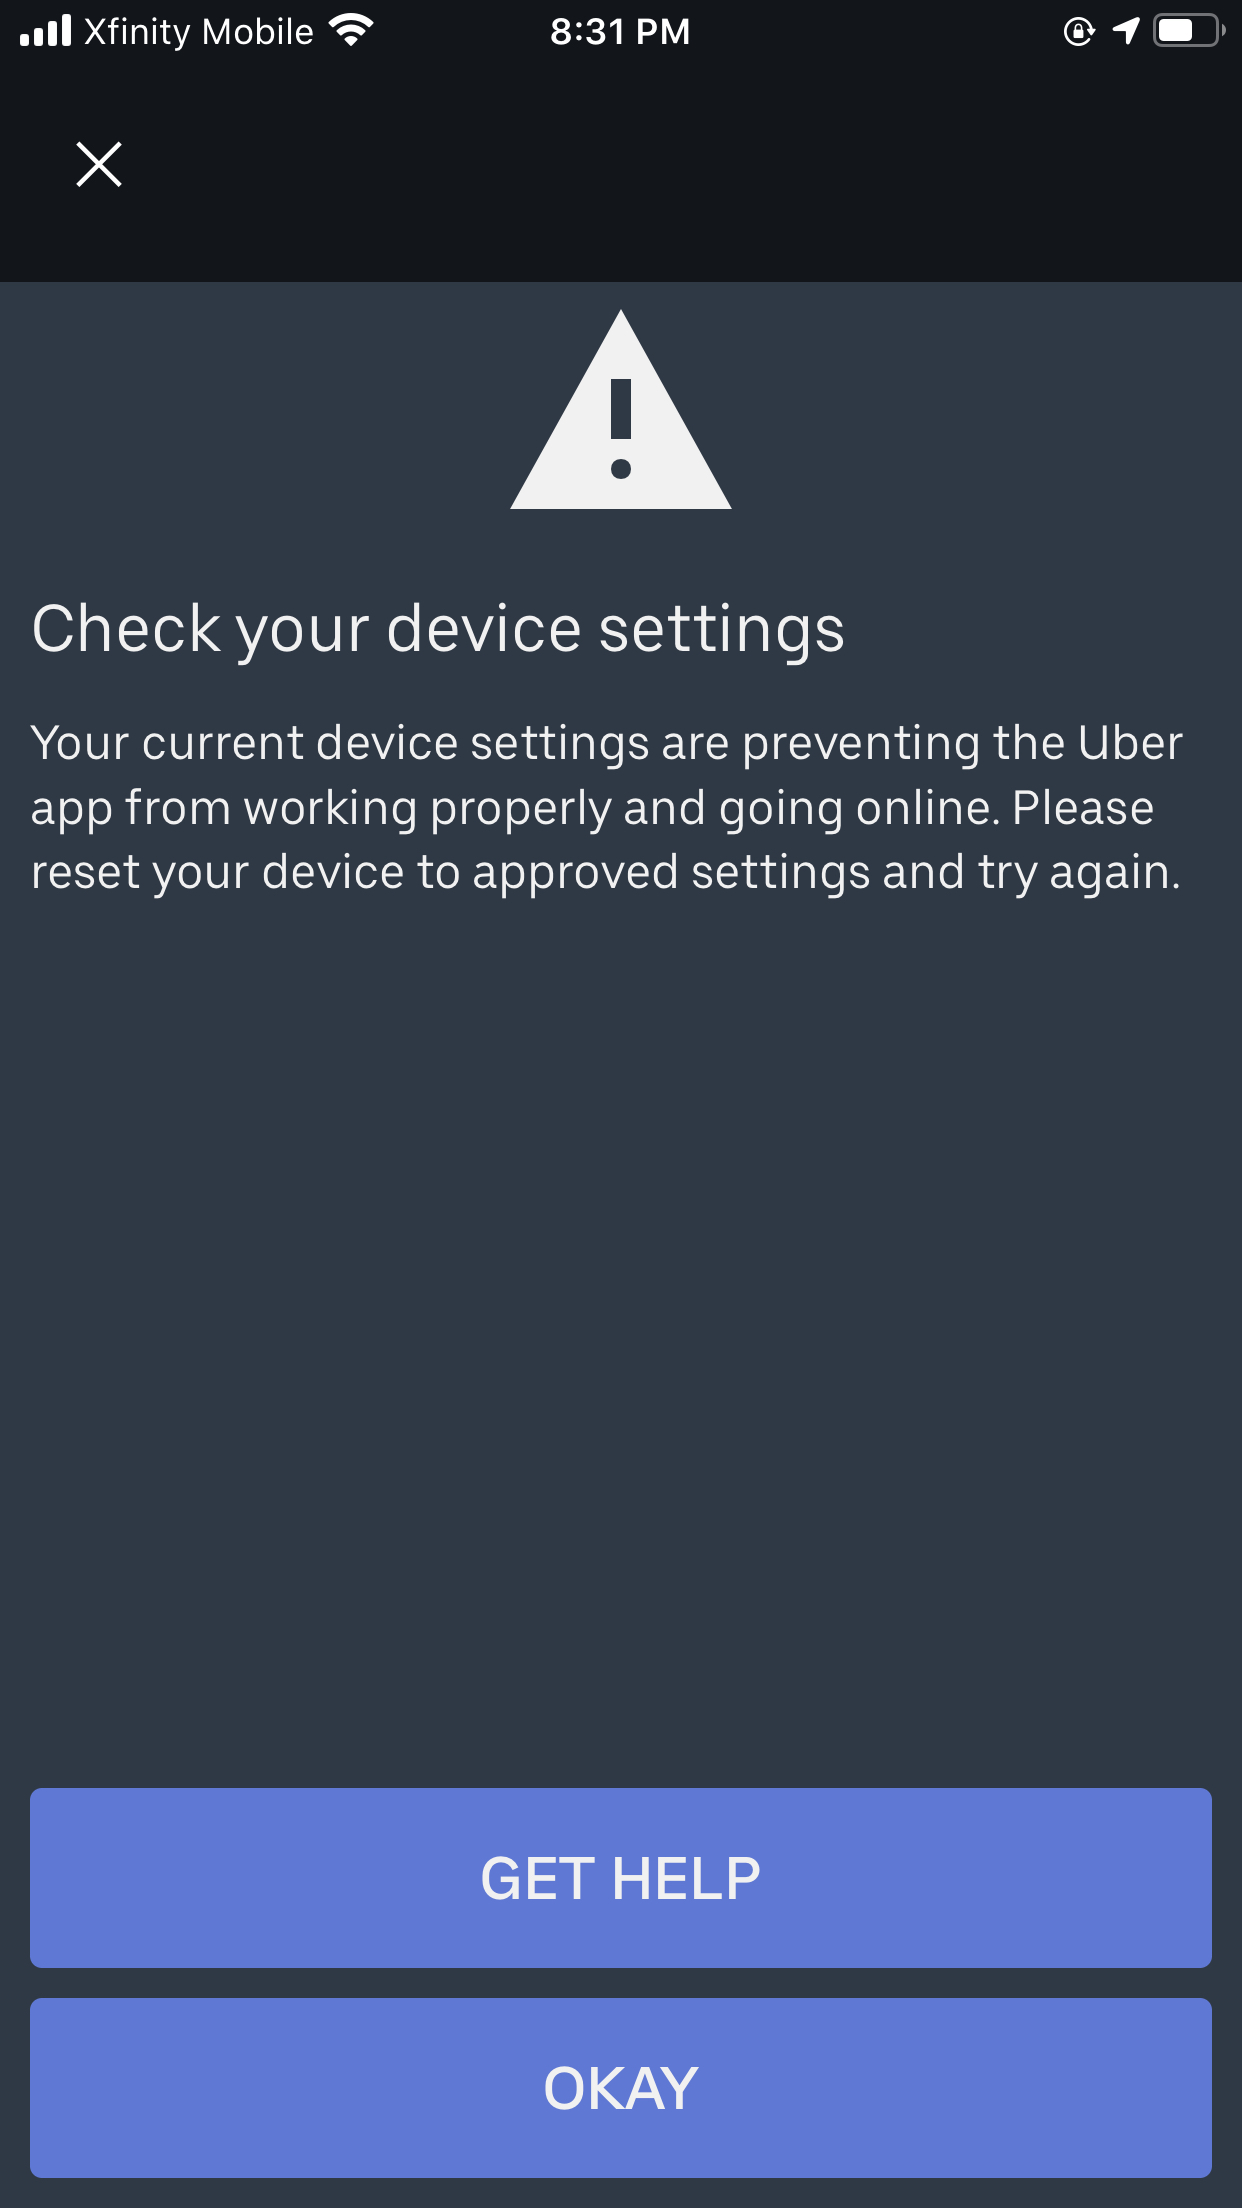 uber driver app for mac comptible ios devices